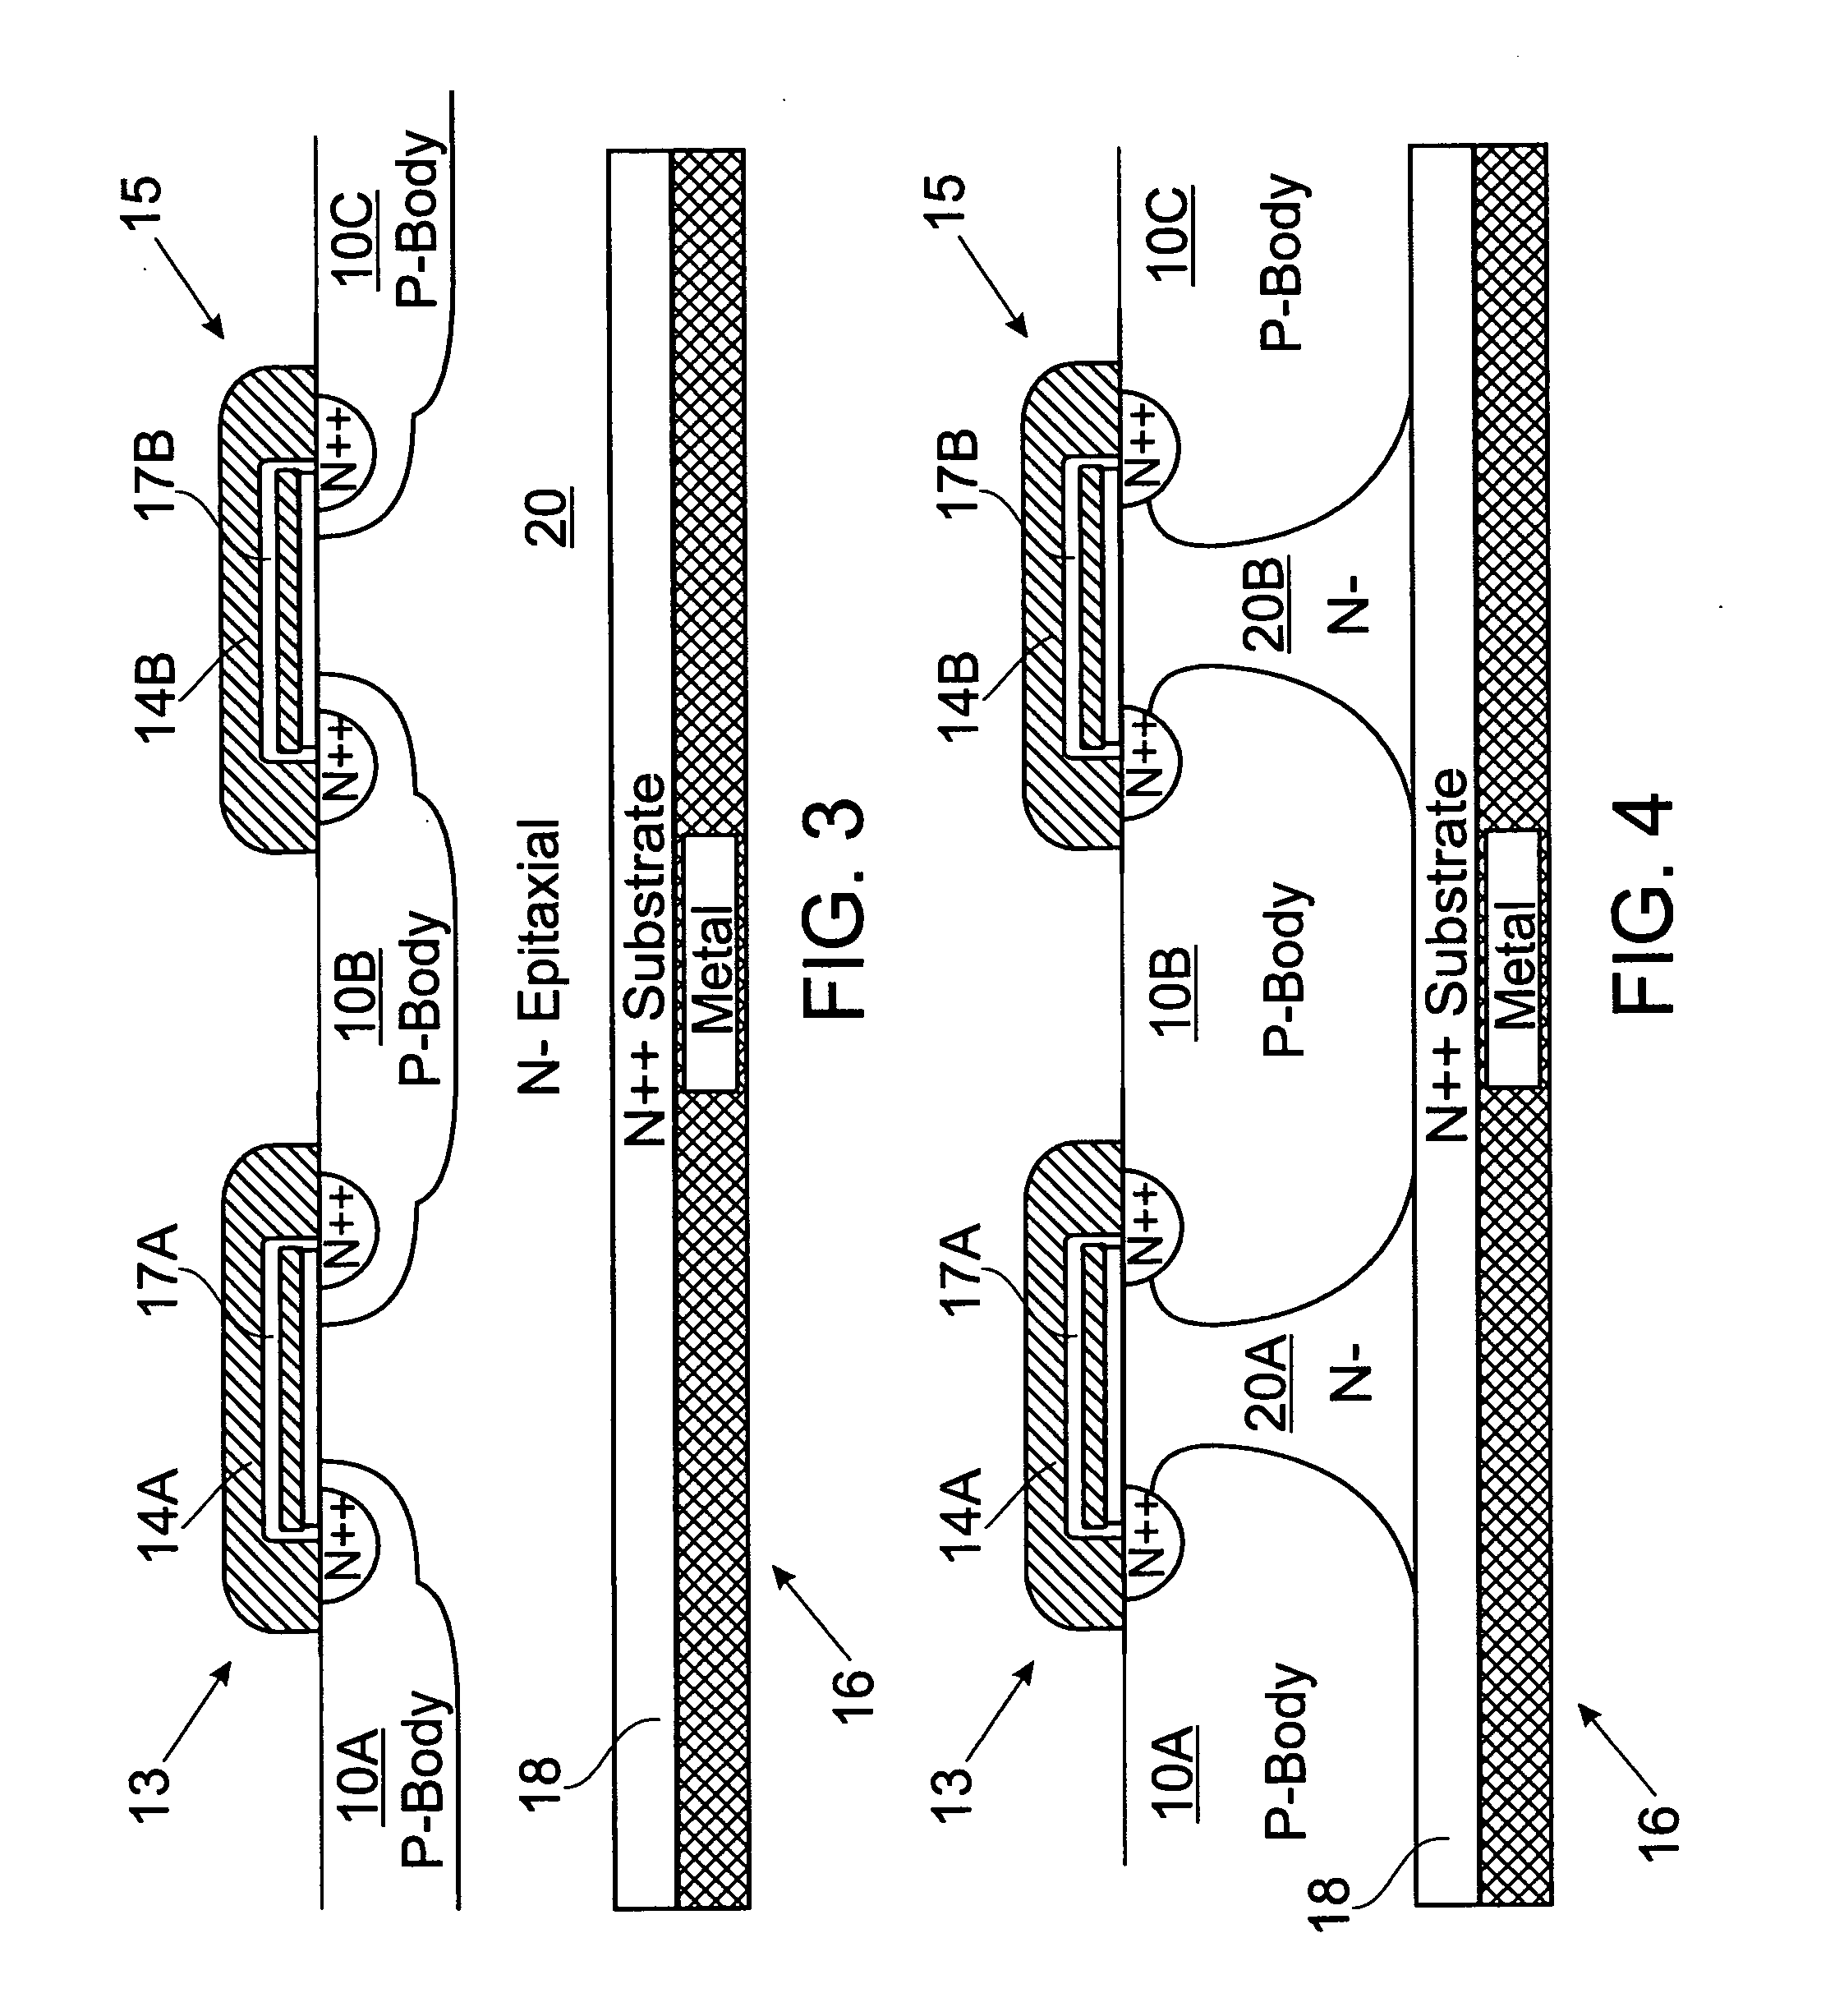 Integrated electronic disconnecting circuits, methods, and systems